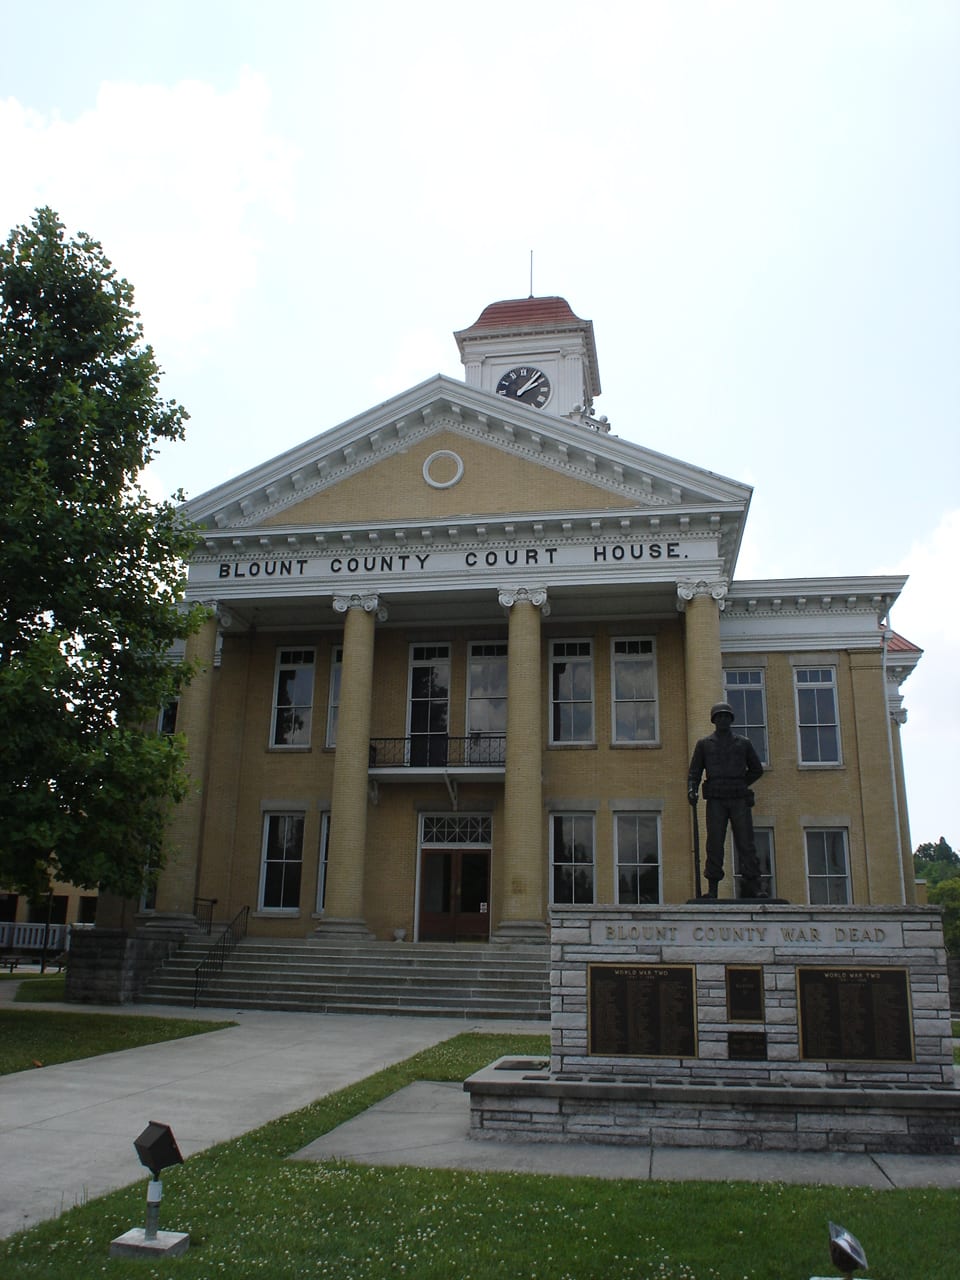 Blount County Court House